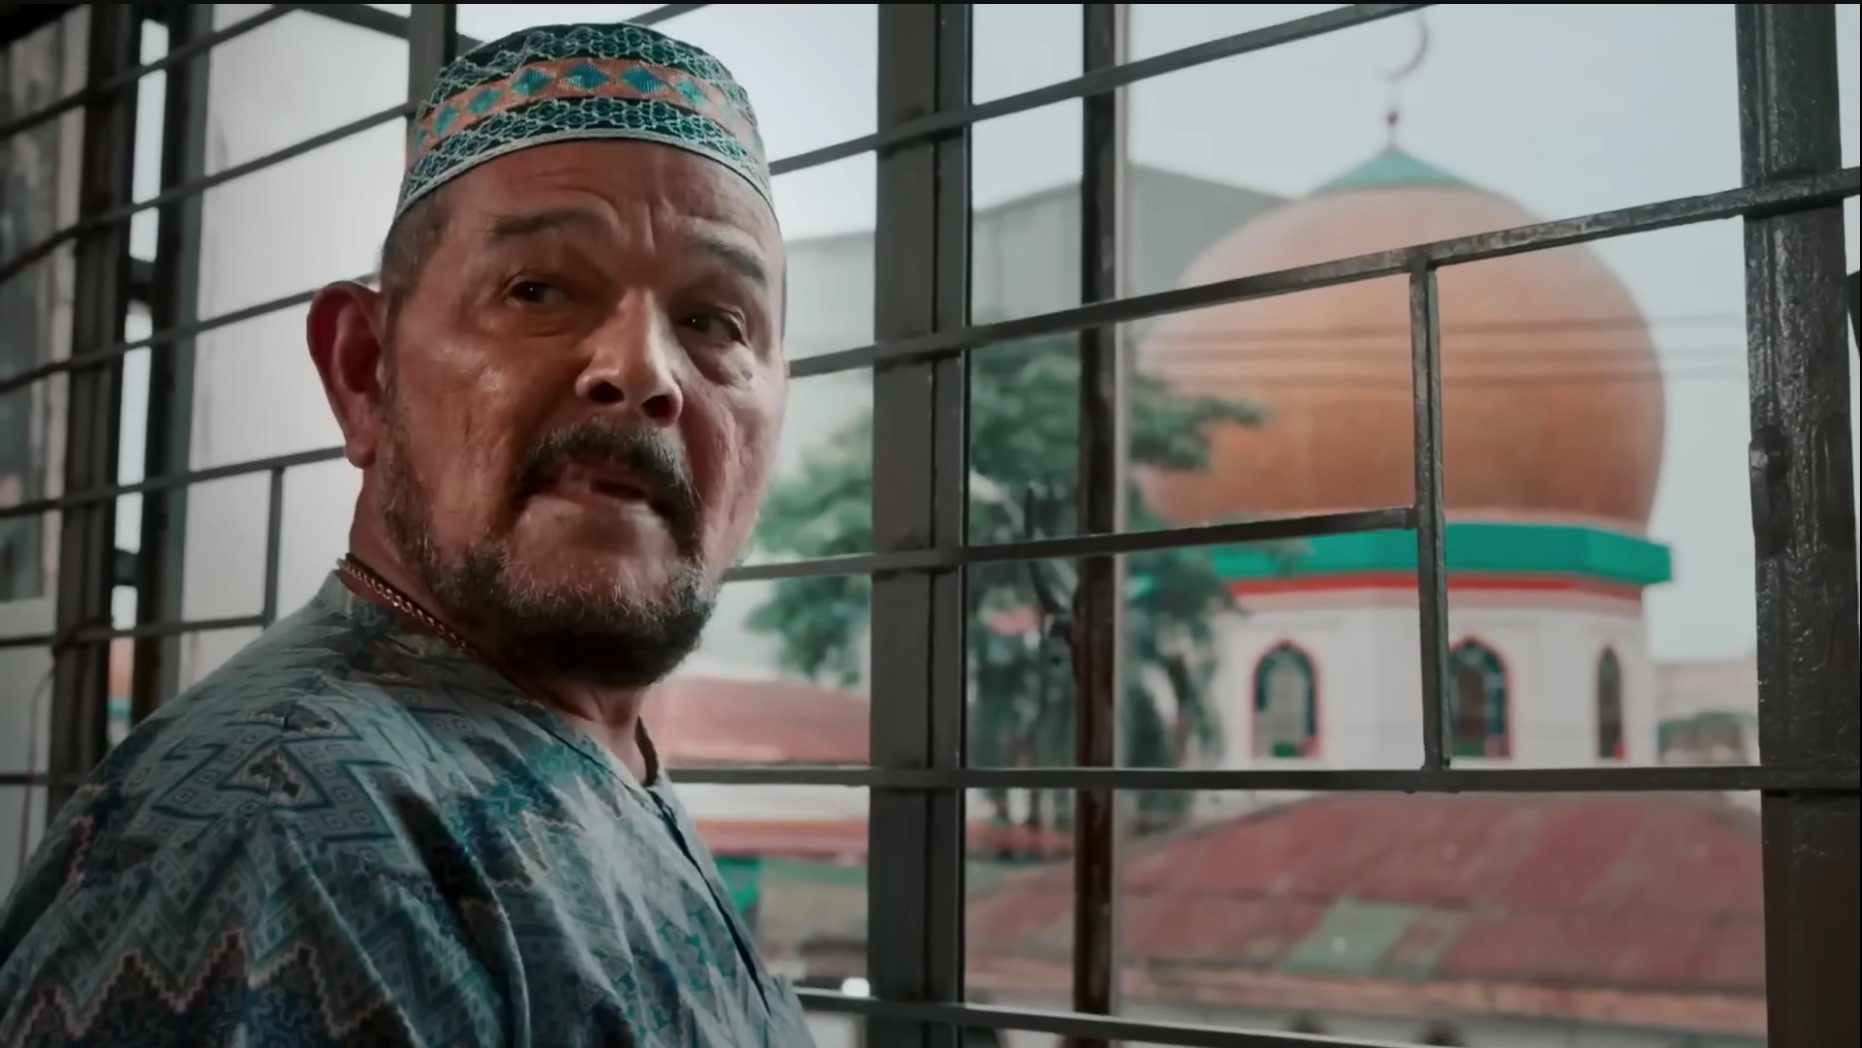 ‘Batang Quiapo’ issues apology over portrayal of Muslim characters